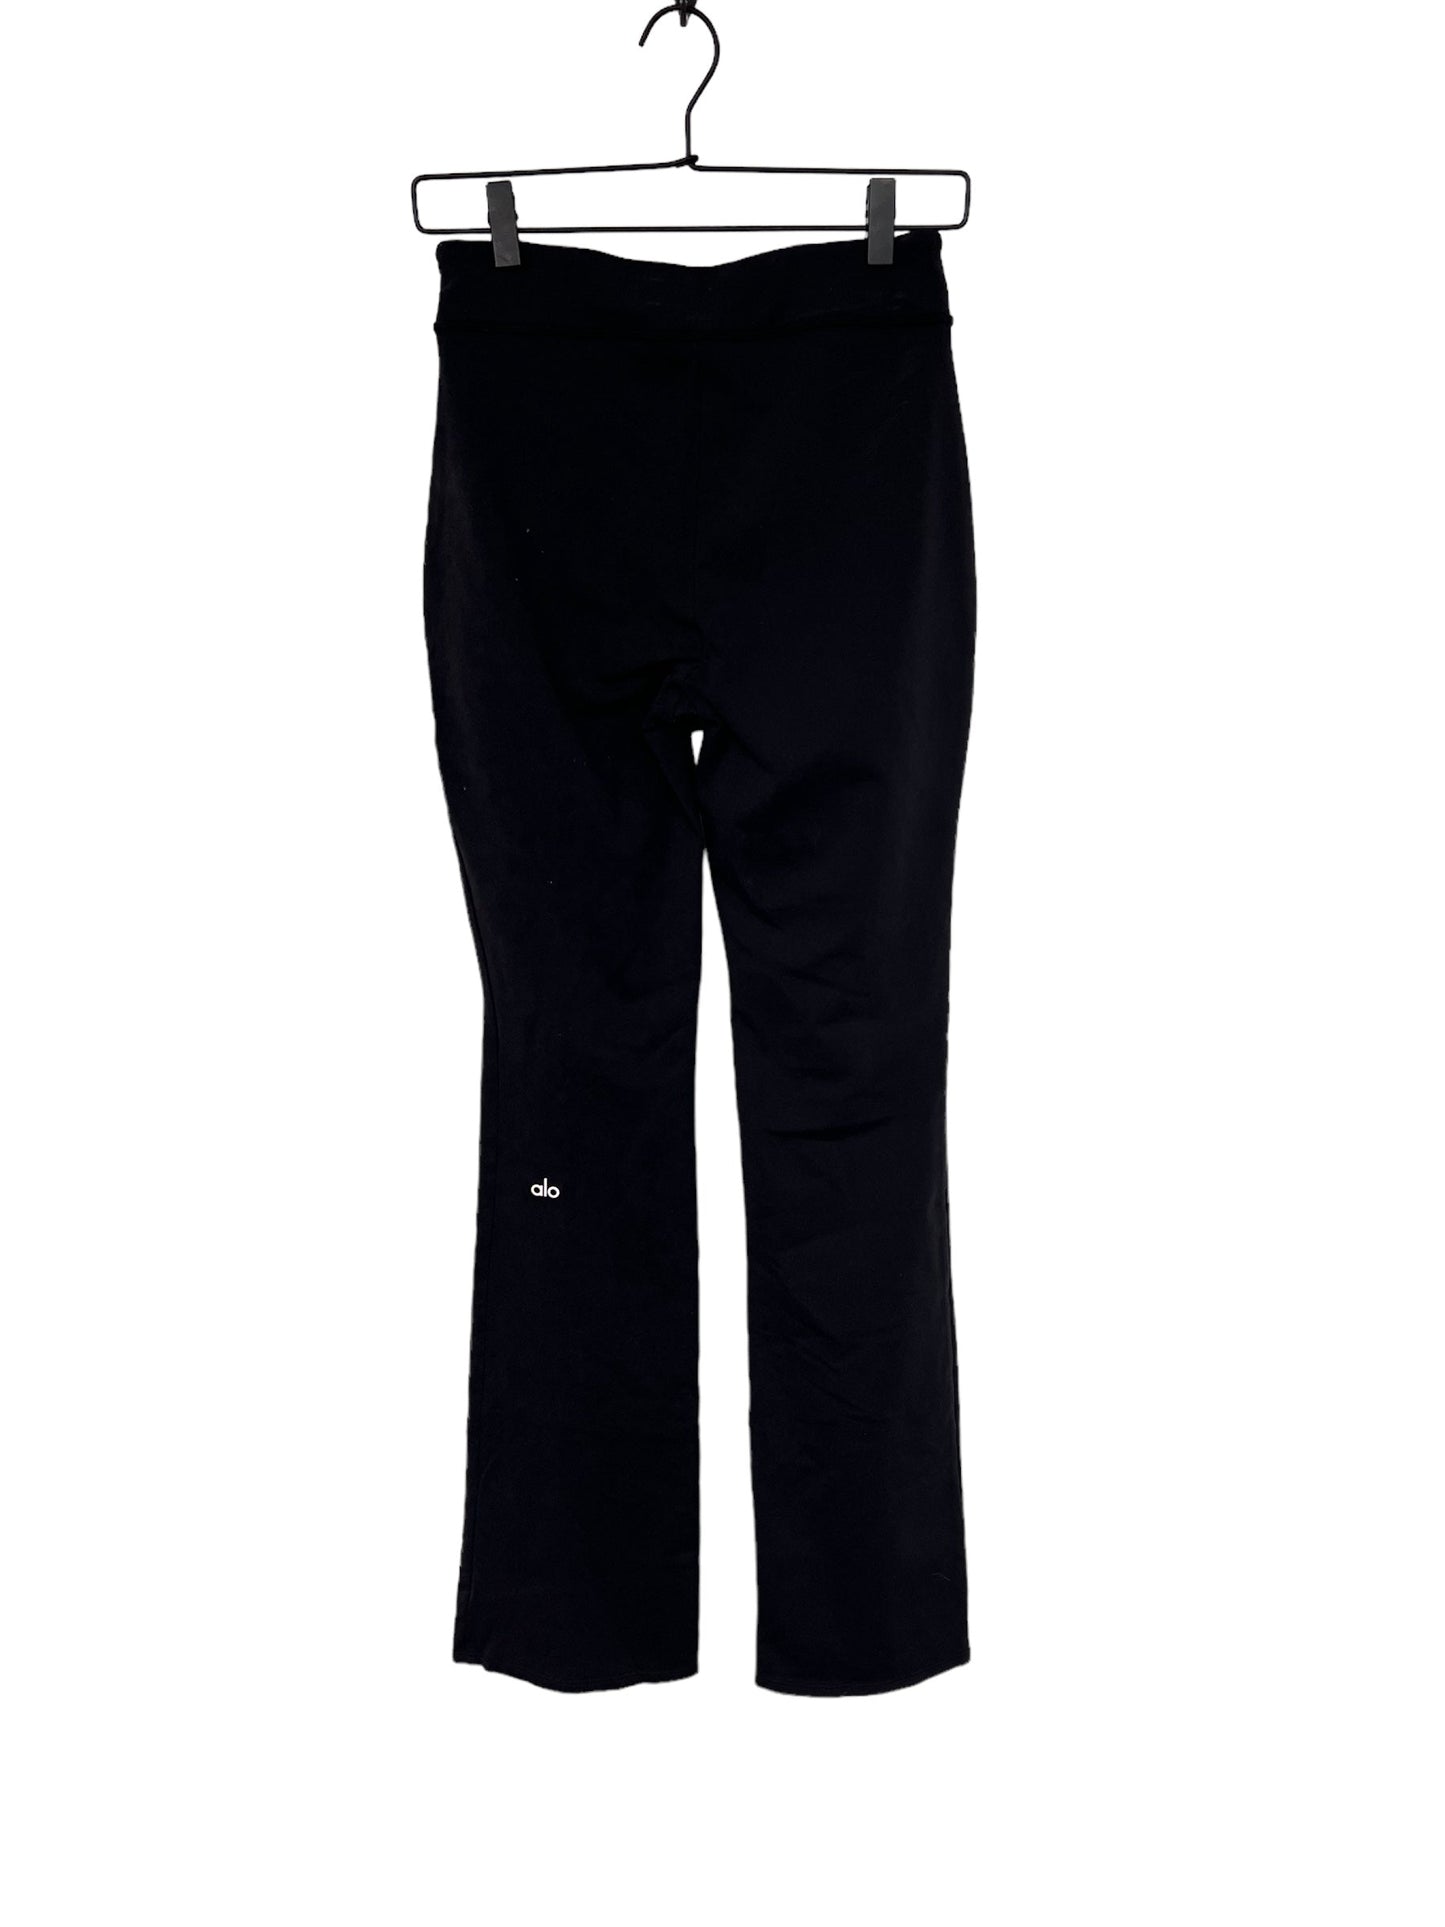 Athletic Pants By Alo  Size: M